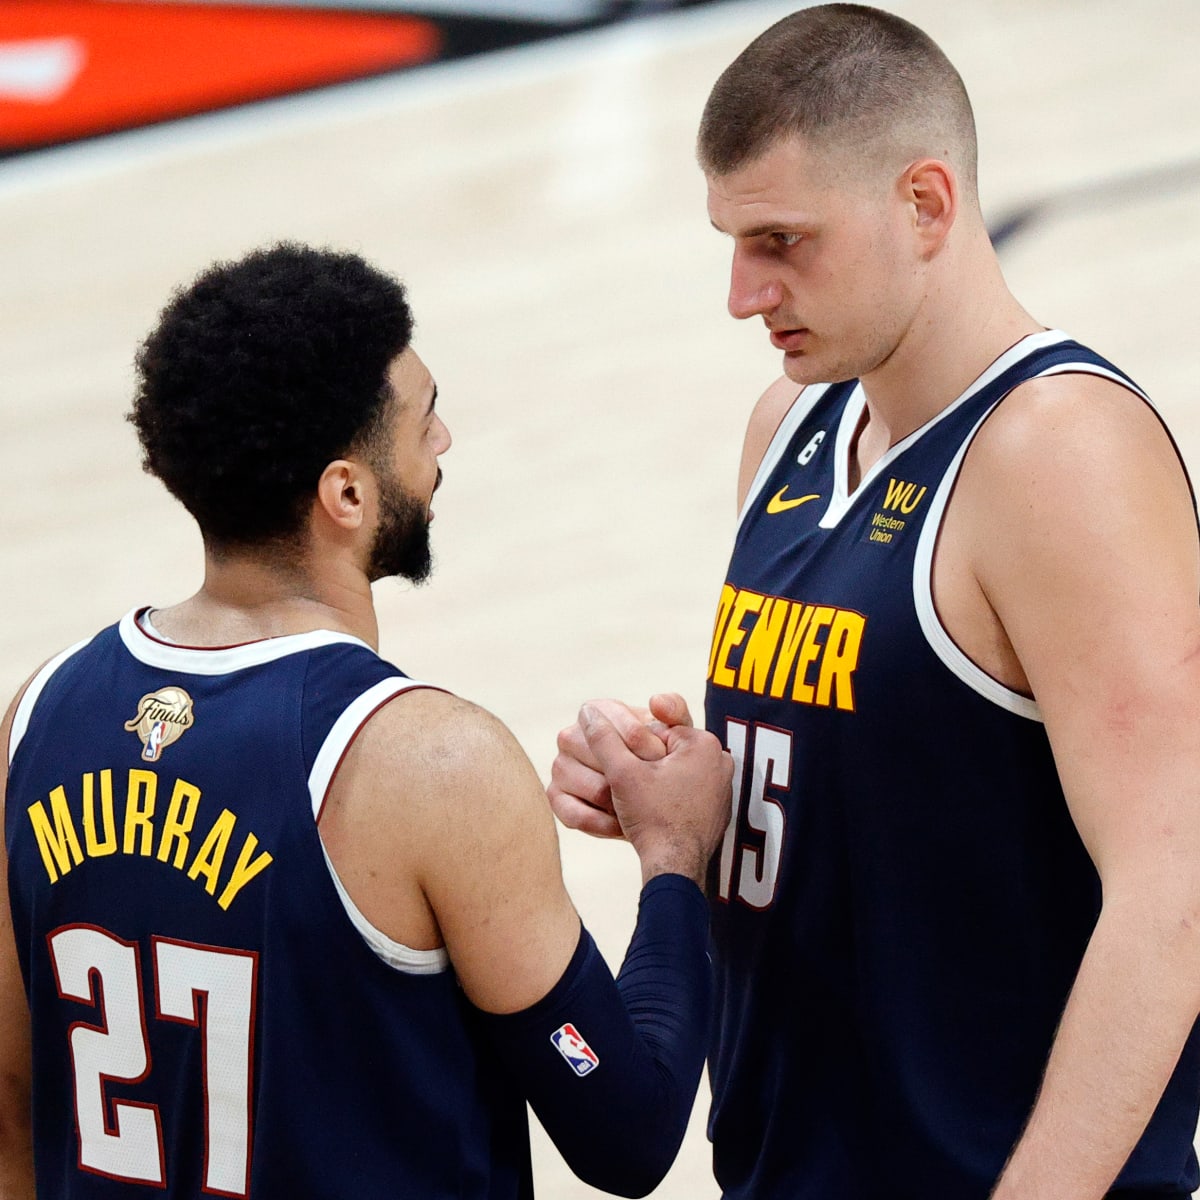 Is what Nuggets' Jamal Murray did sustainable? We asked NBA executives